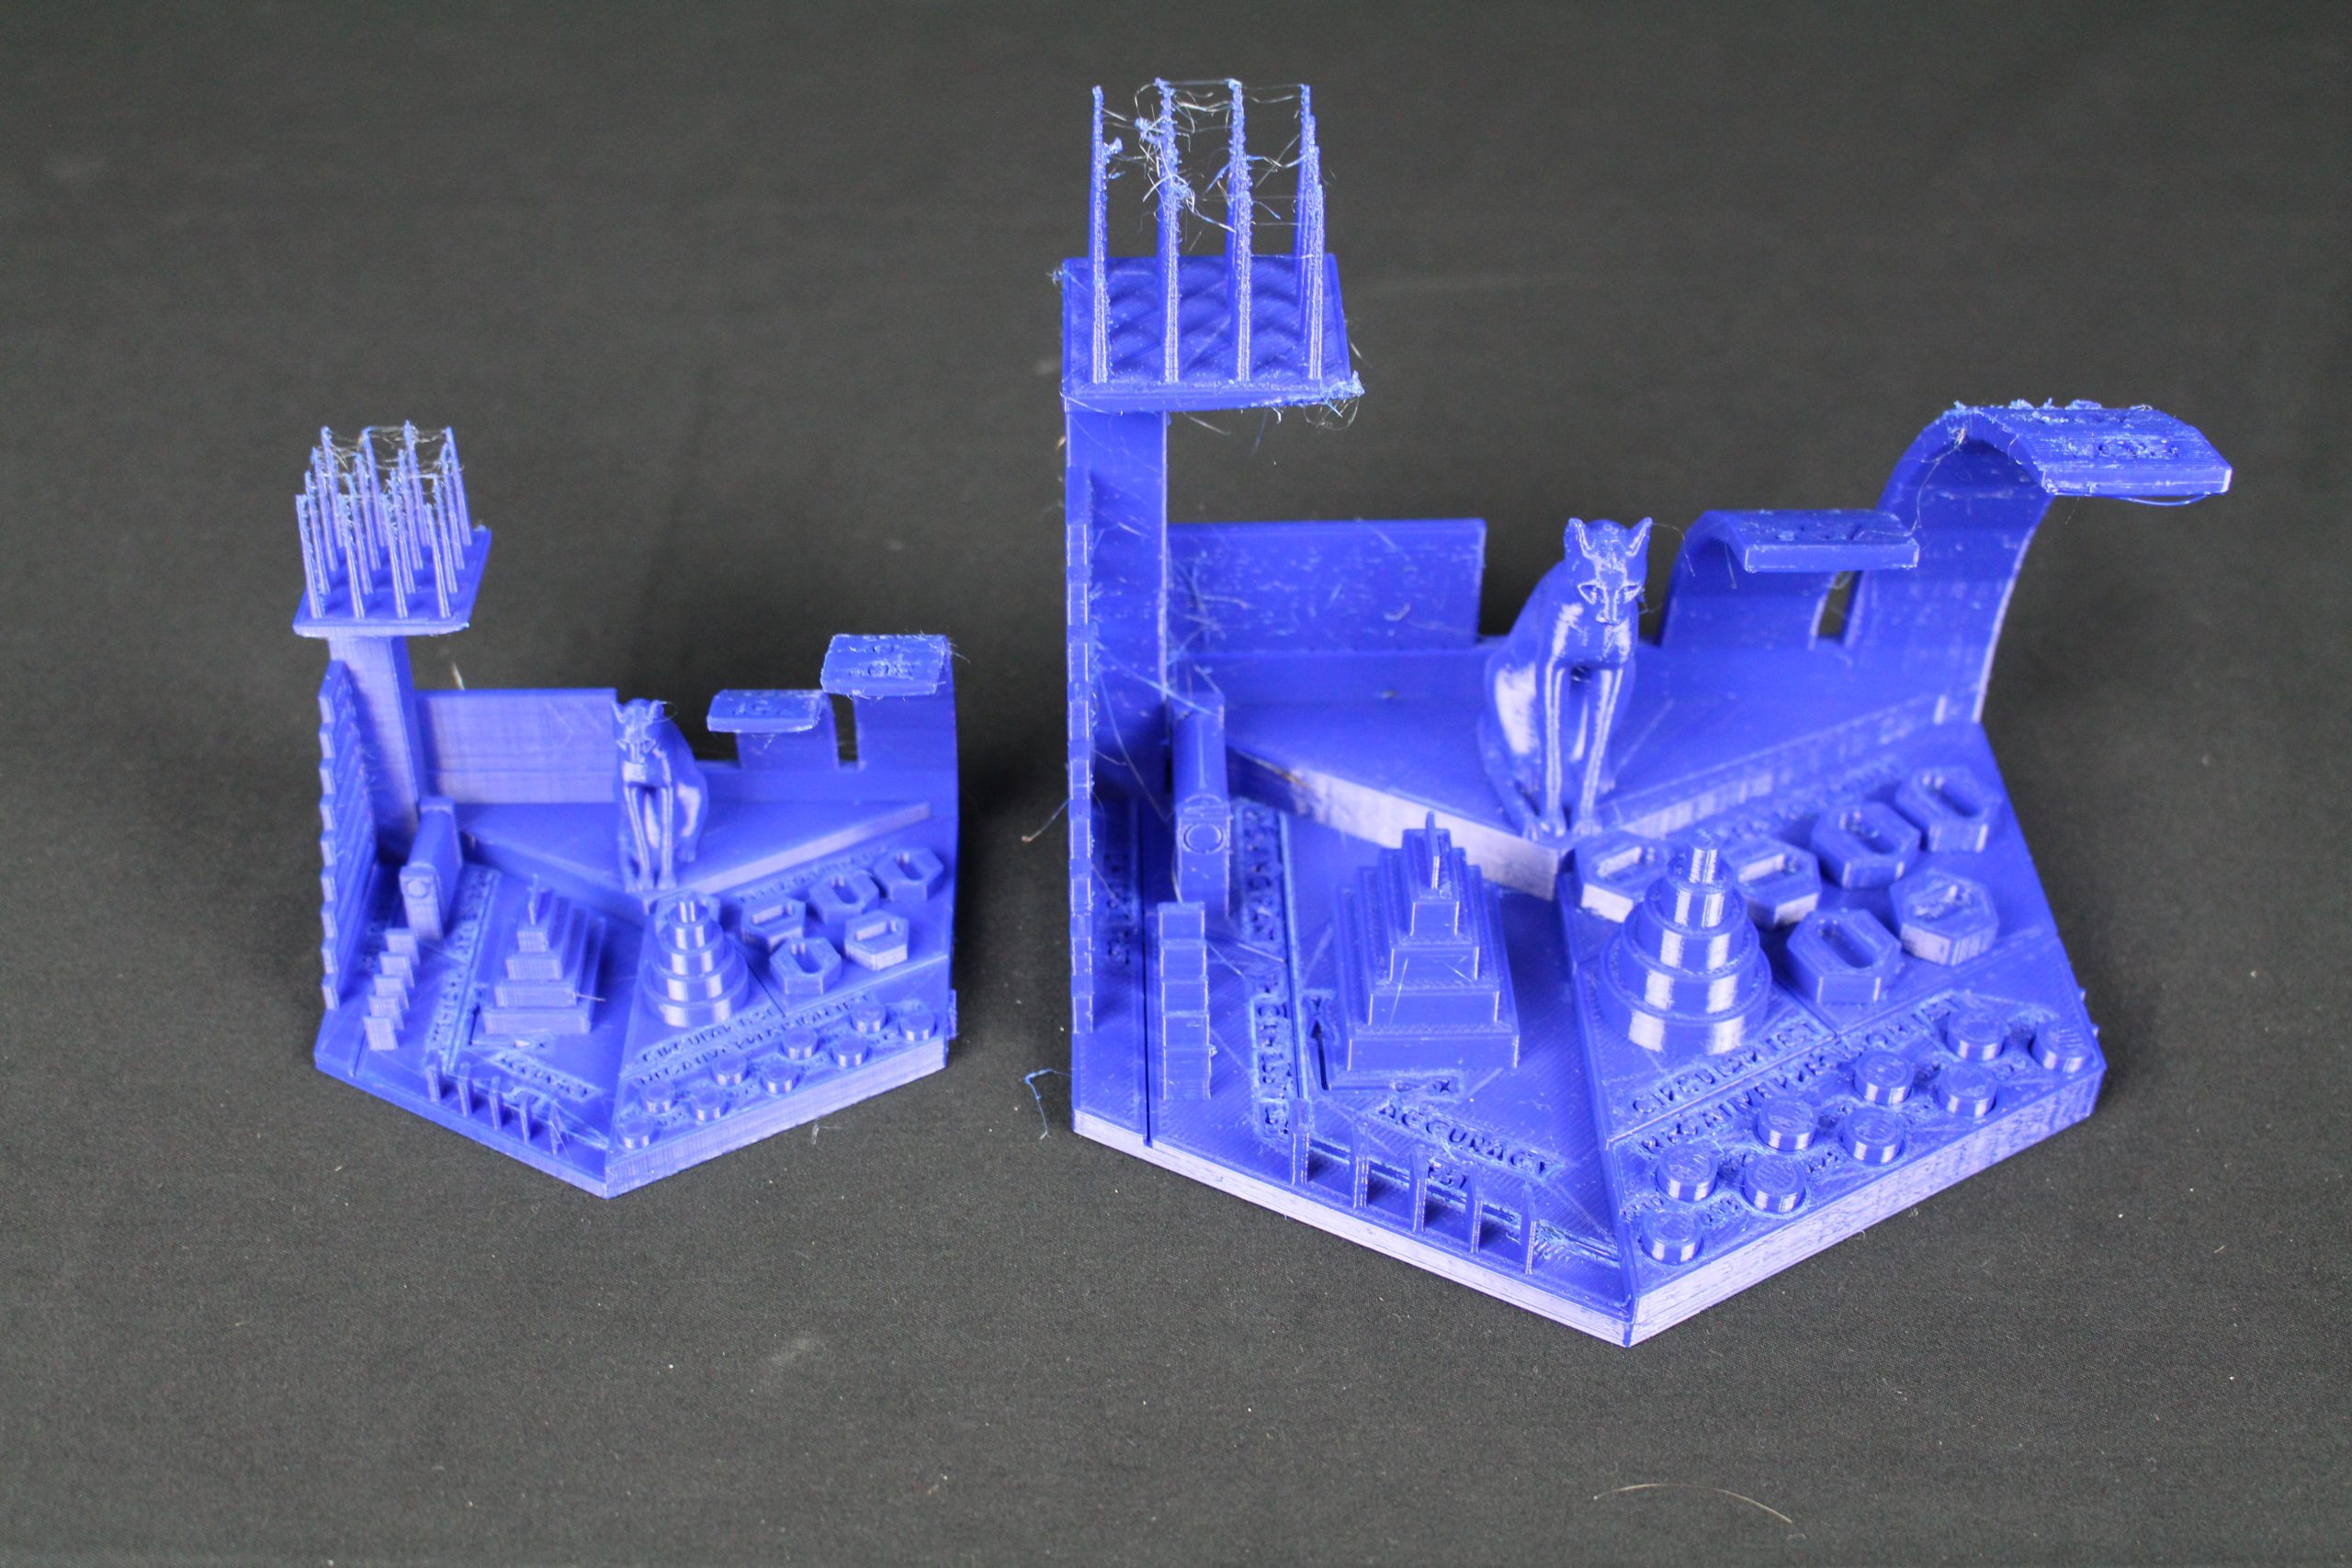 3DPI benchmarking model. Photos by 3D Printing Industry.